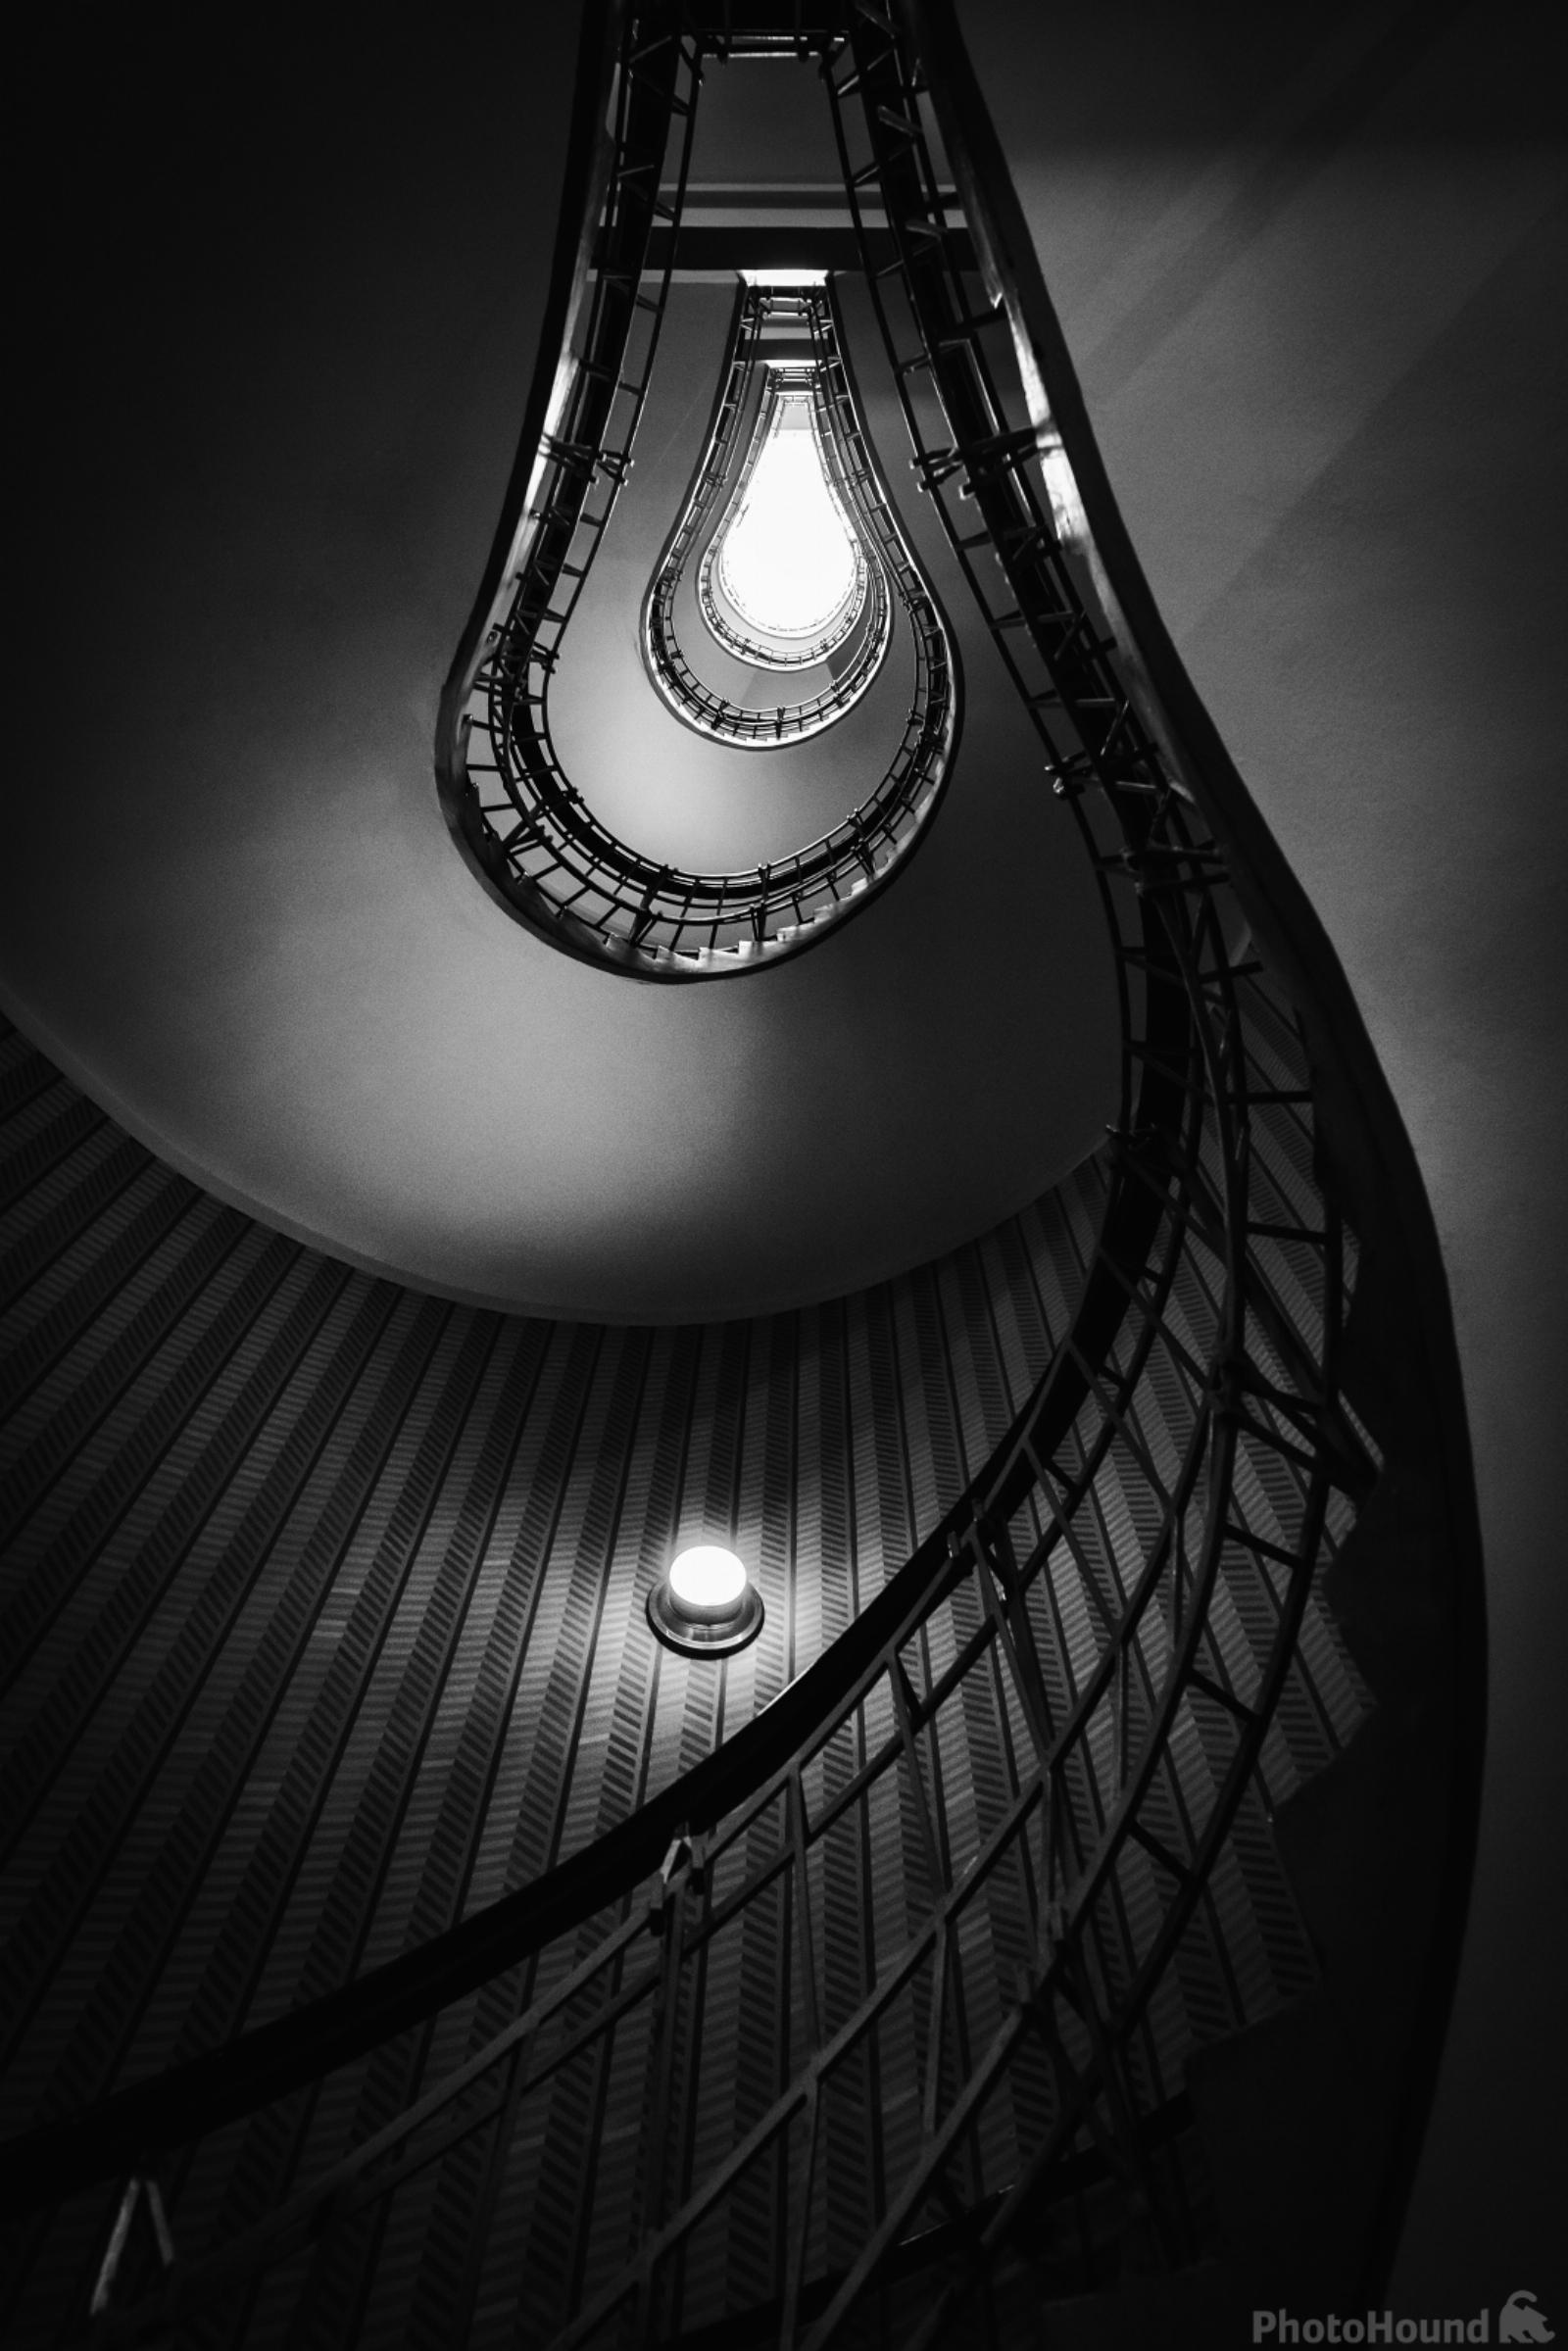 Image of The lightbulb staircase by VOJTa Herout